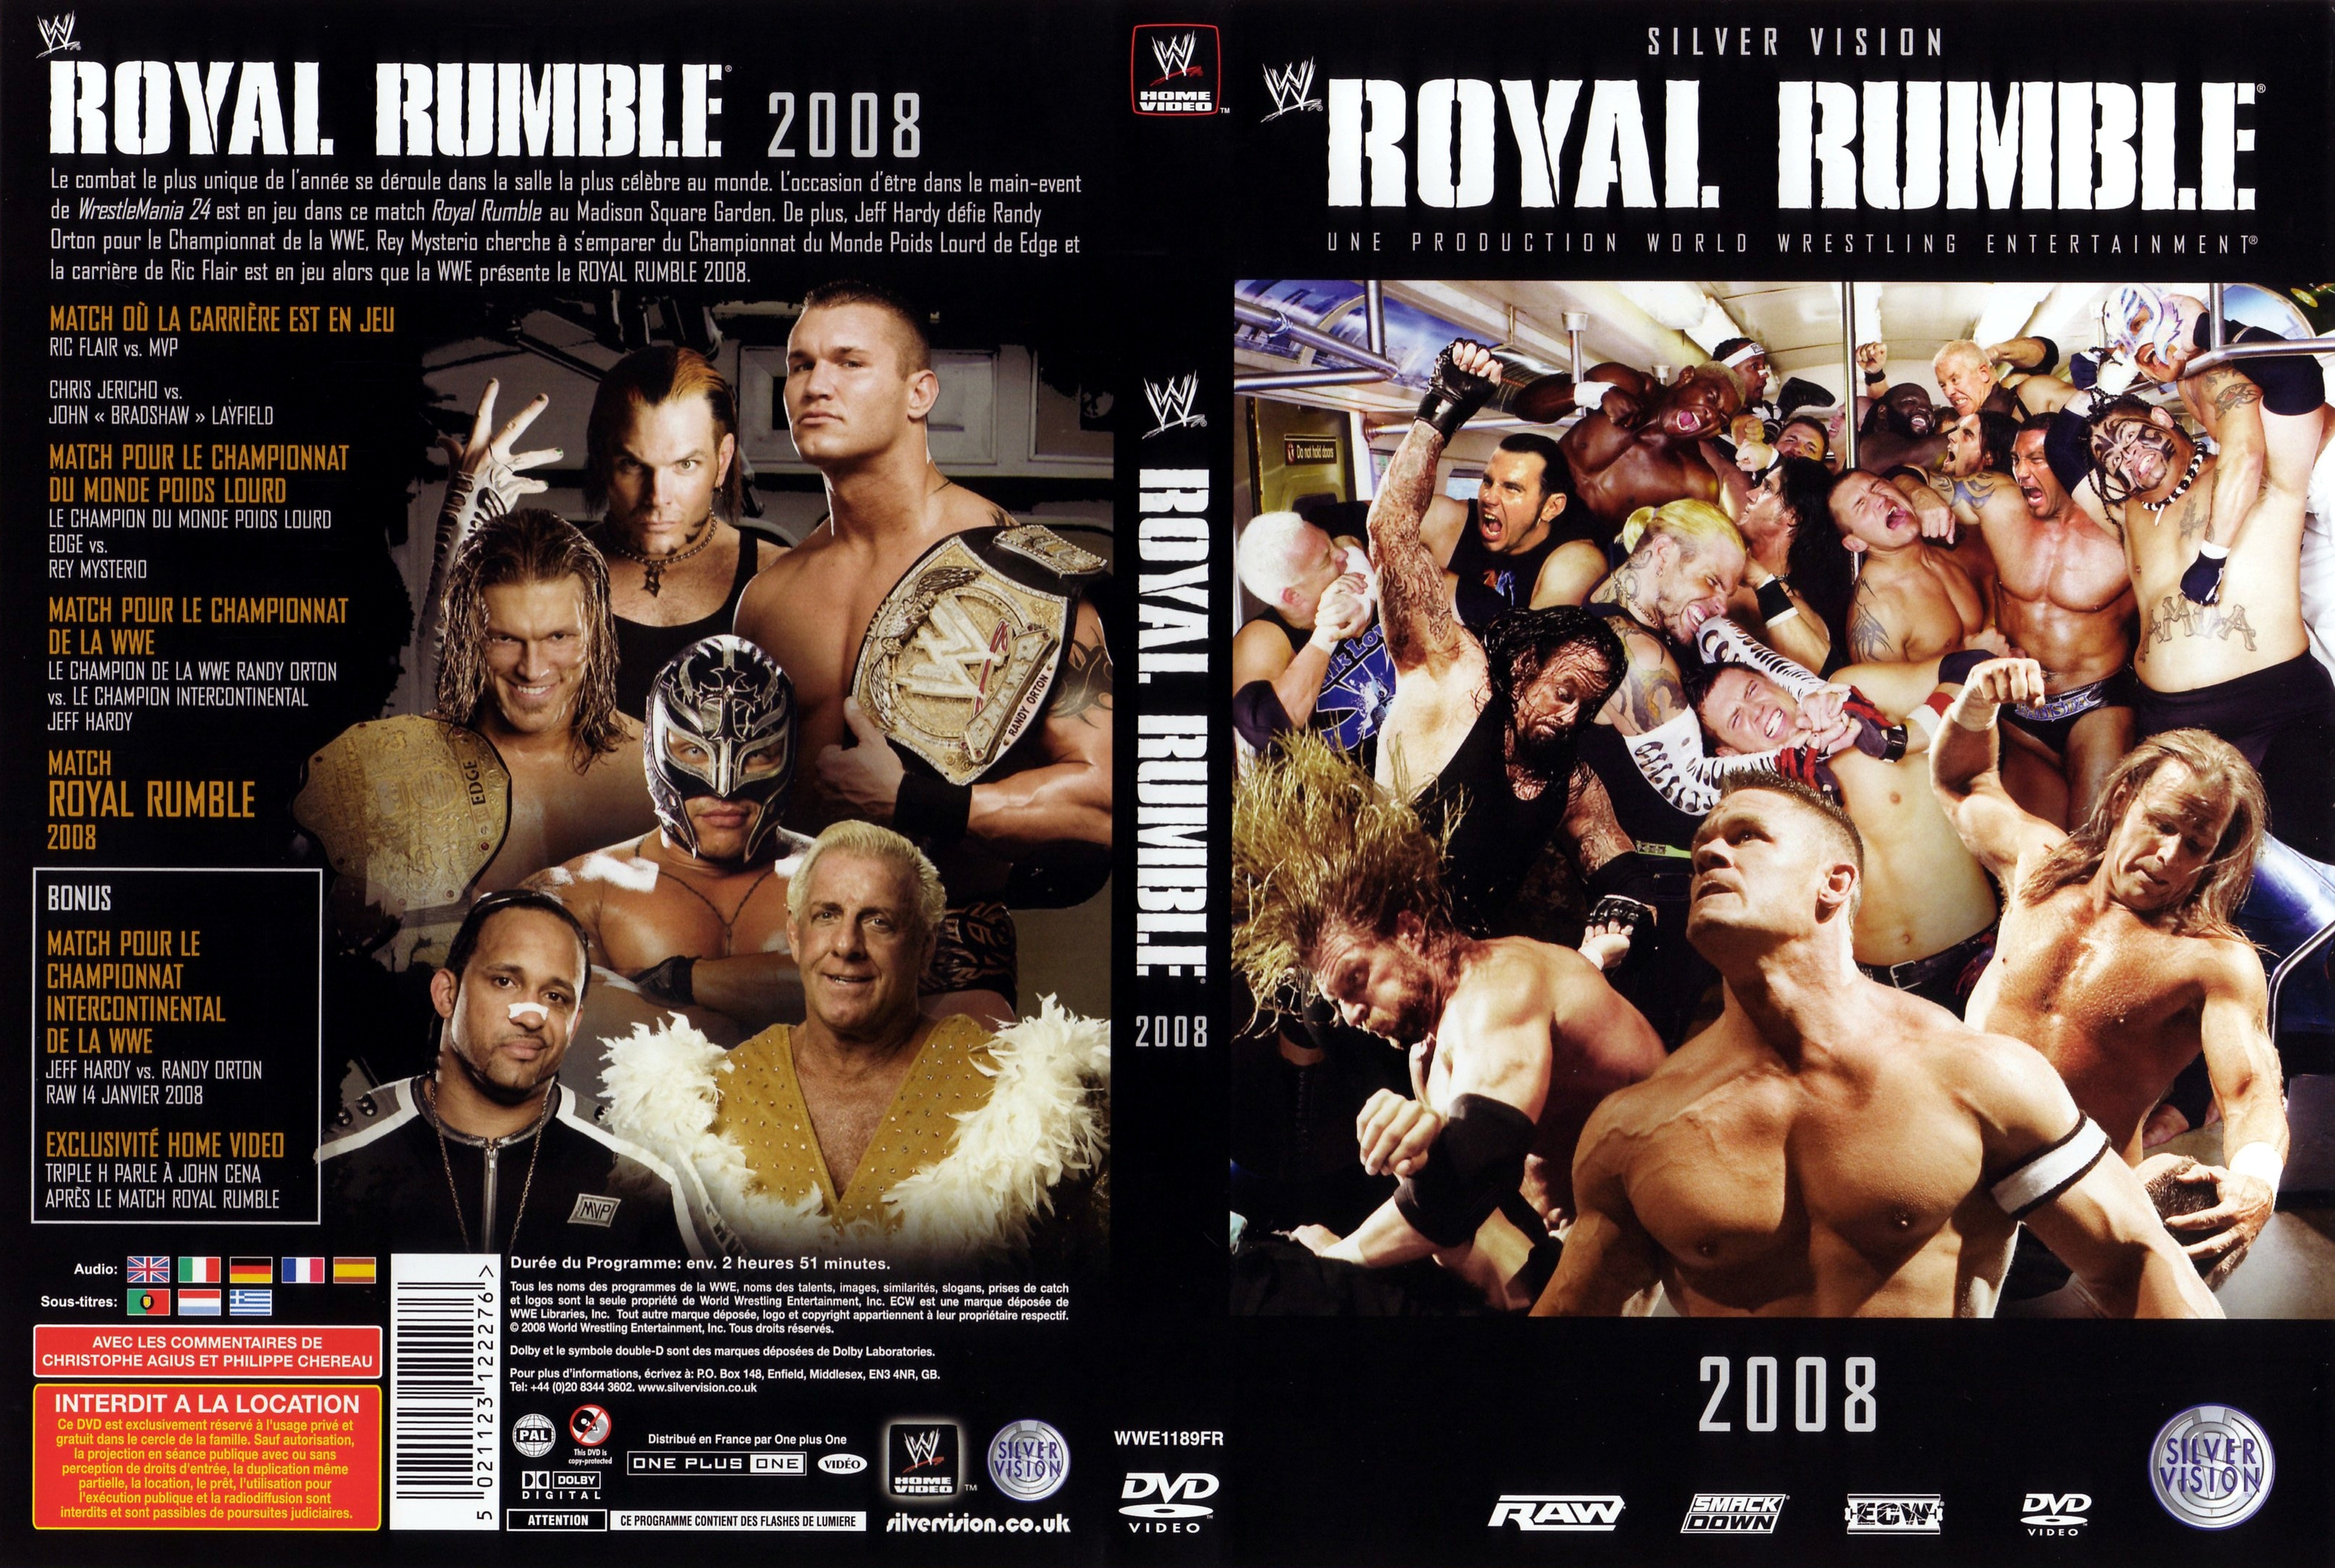 Jaquette DVD WWE Royal Rumble 2008